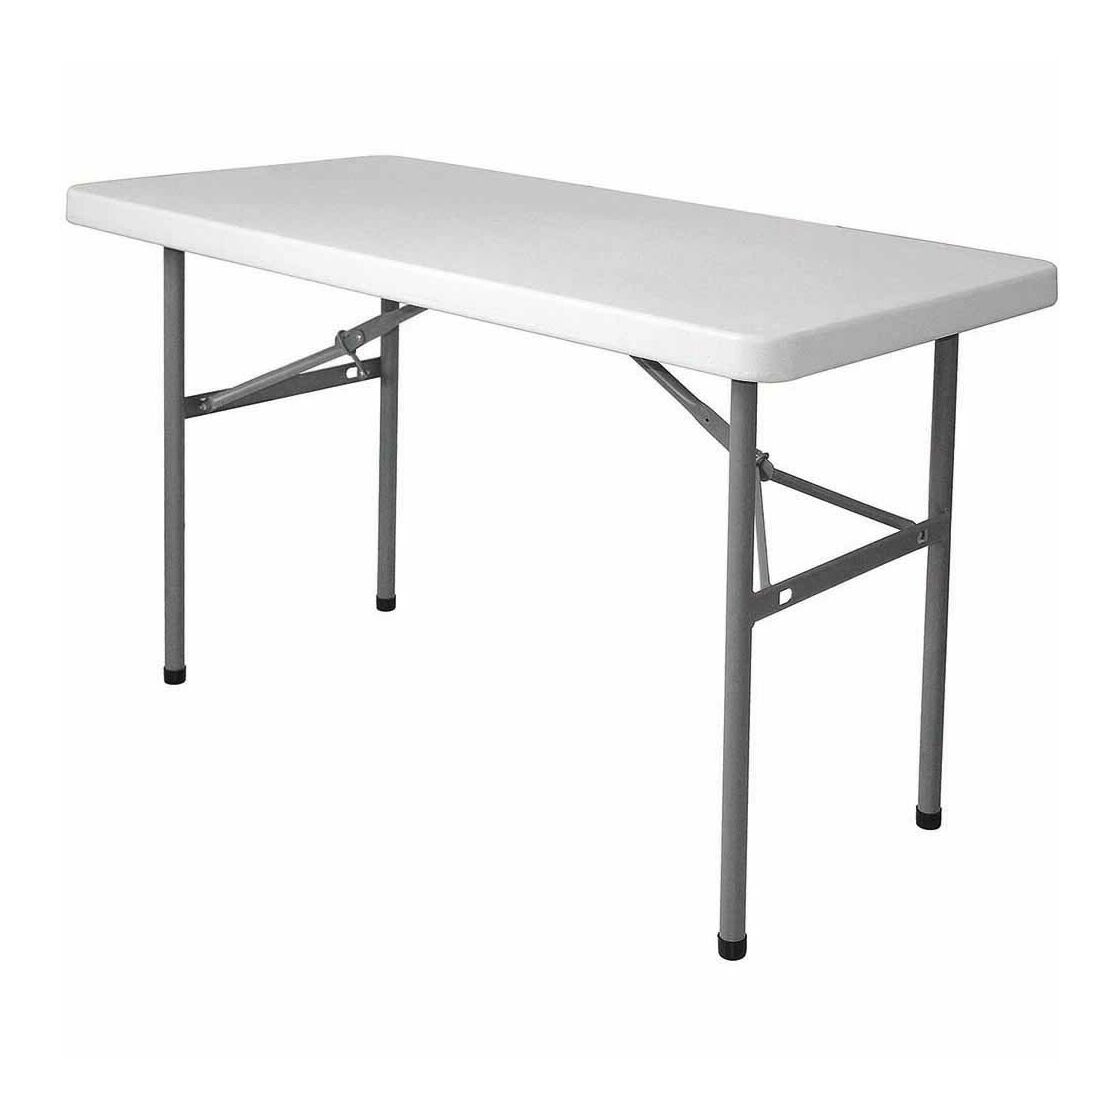 Foldable Buffet Table Dimensions 1220 X 610 X 740 Mm Wxdxh 60 89